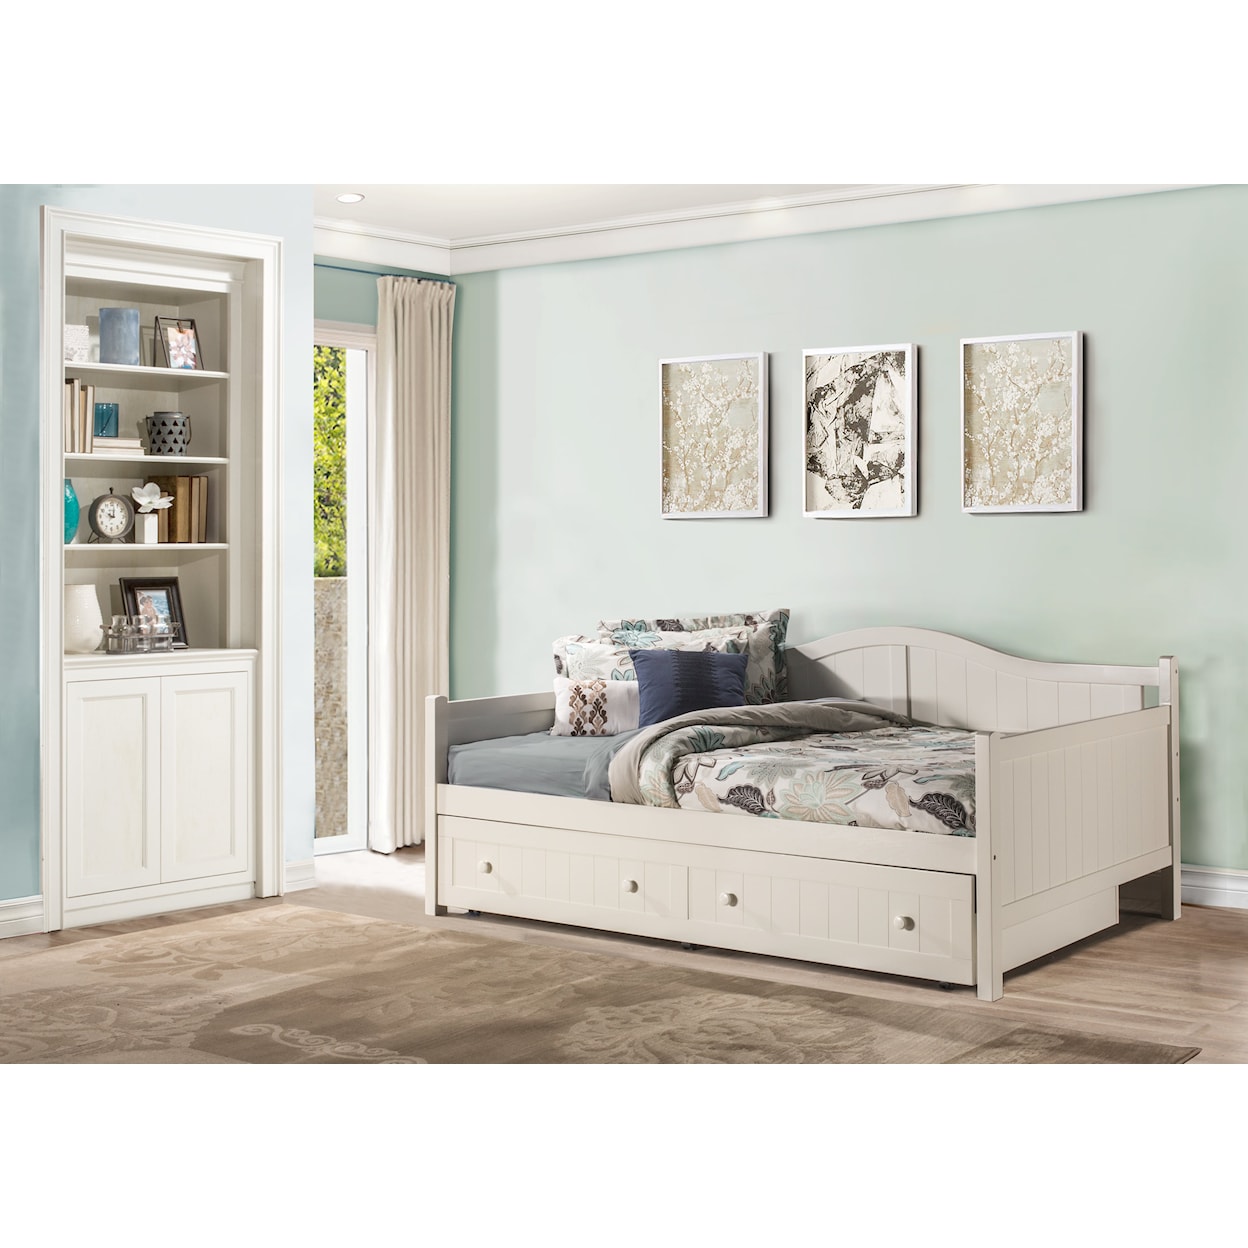 Hillsdale Staci Full Daybed